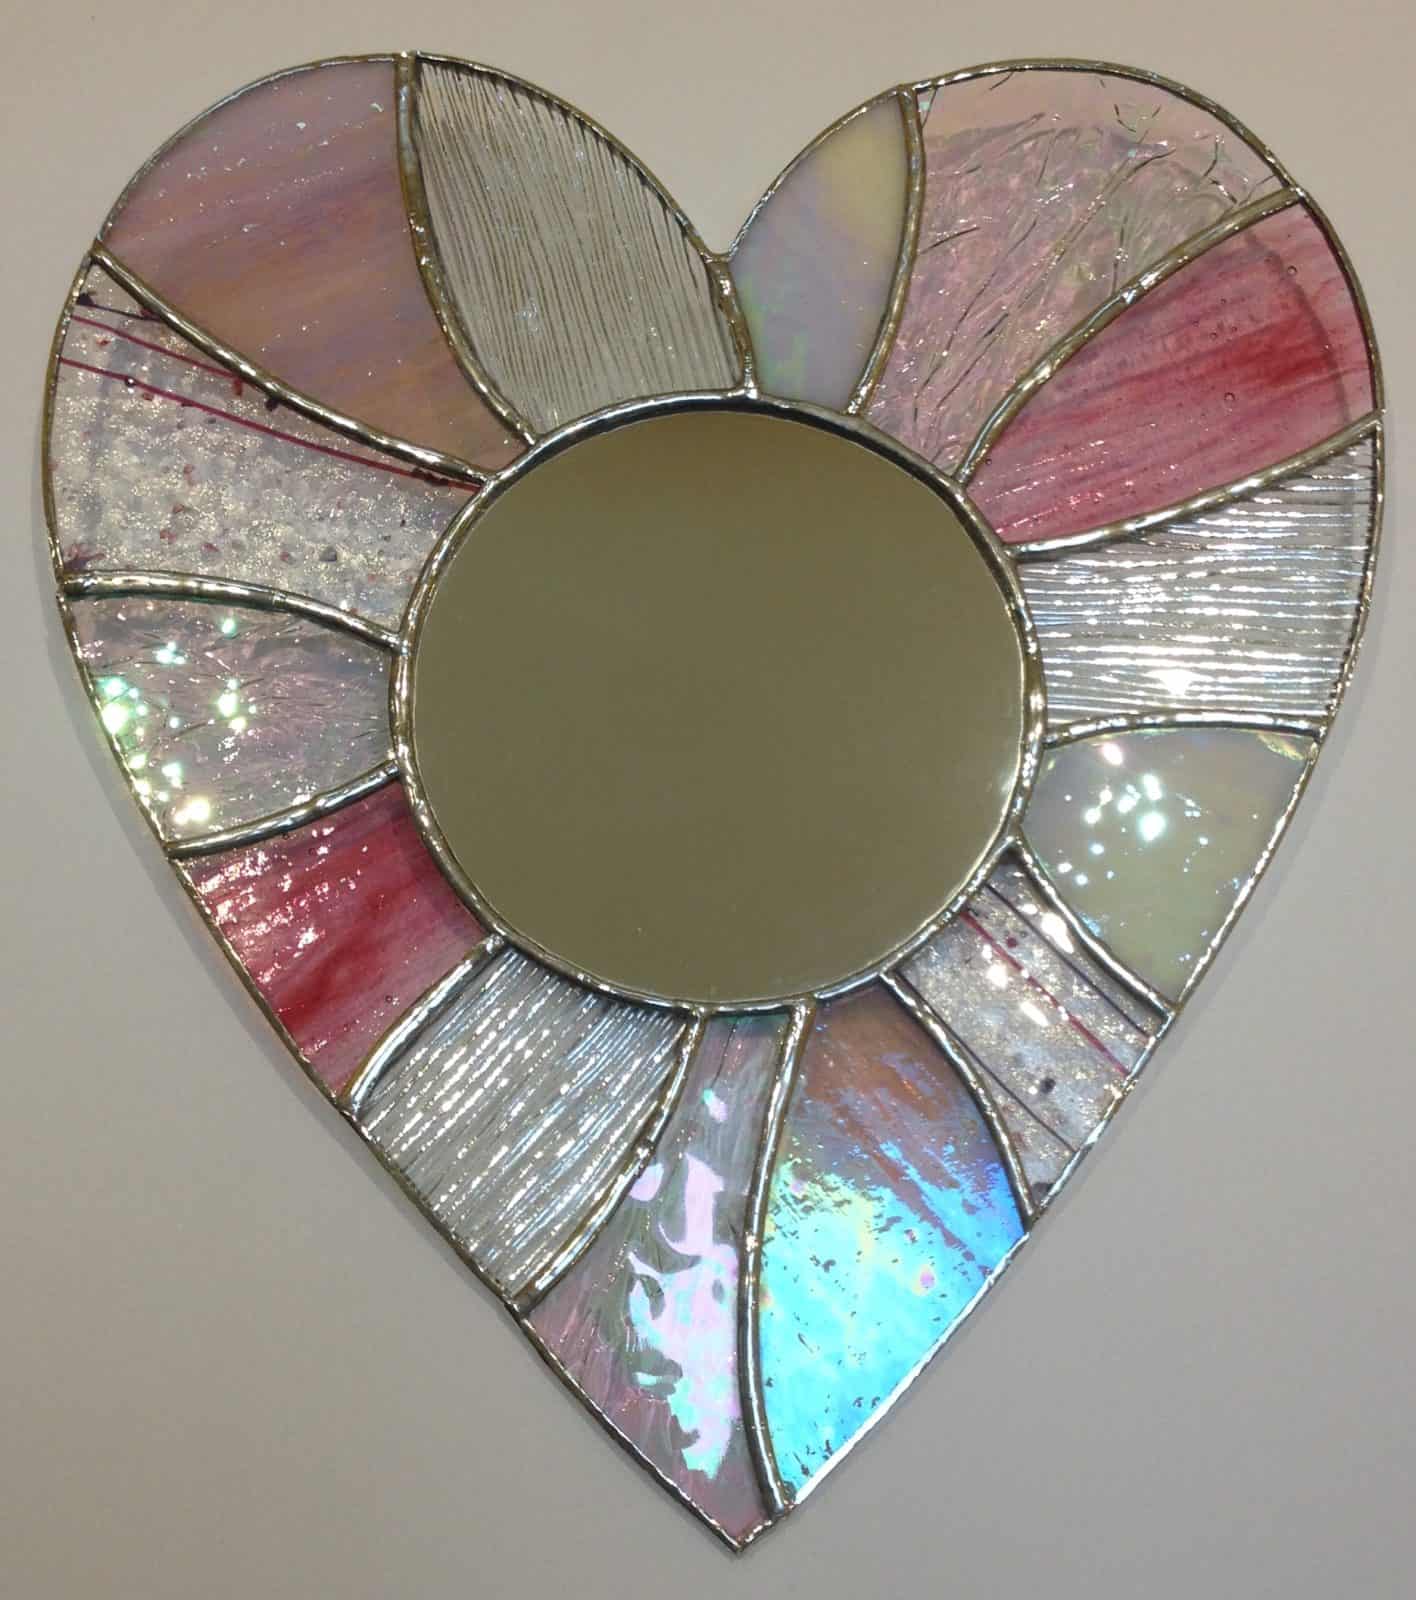 stained glass heart mirror